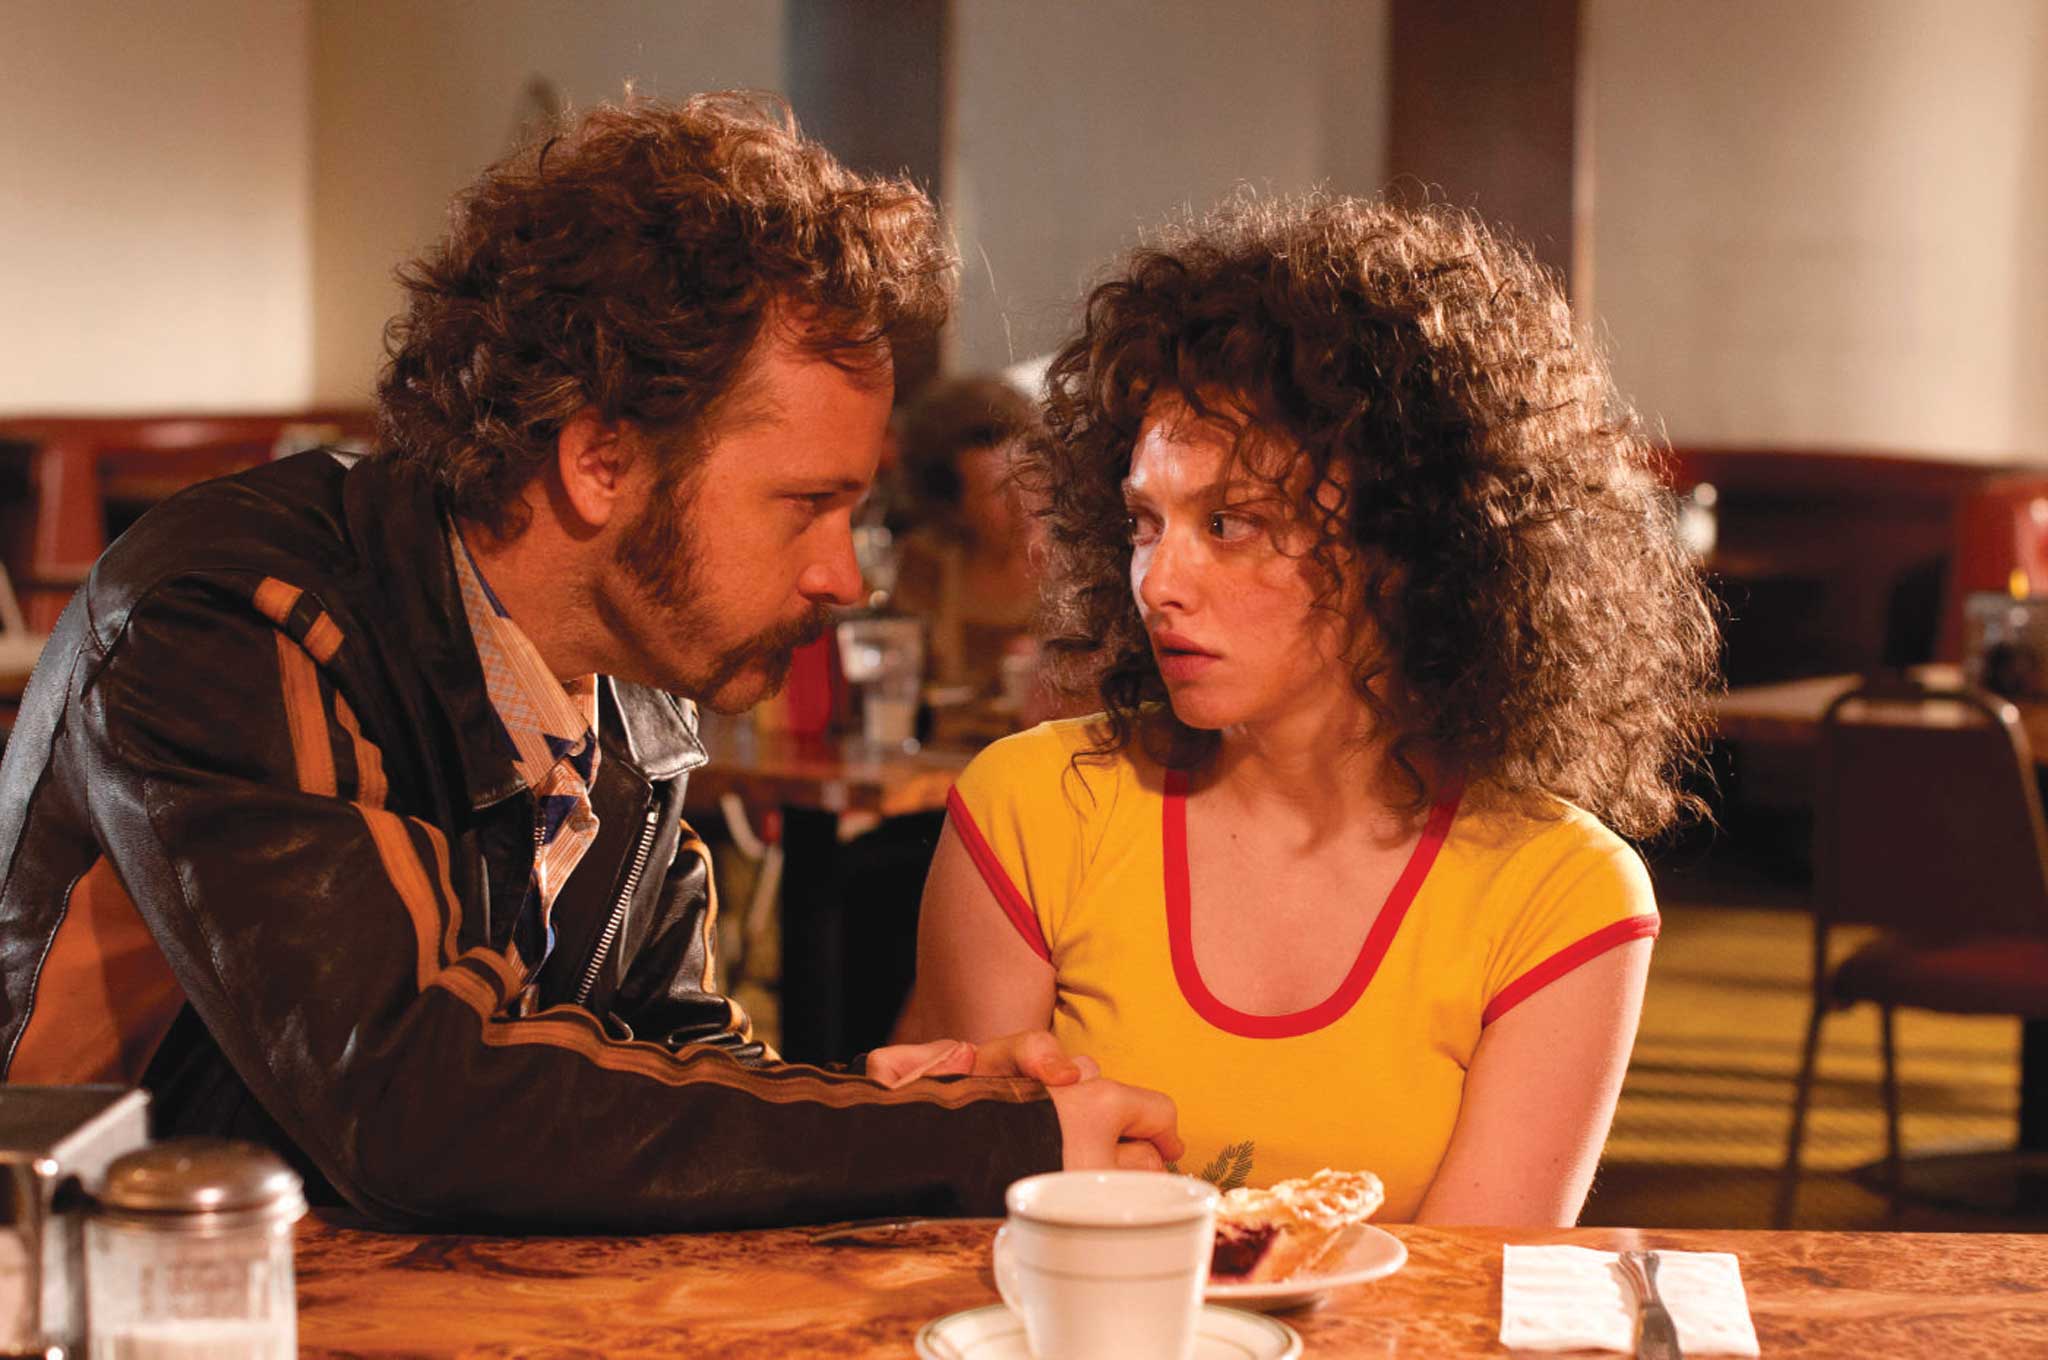 Abusive relationship: Amanda Seyfried and Peter Sarsgaard star in 'Lovelace'